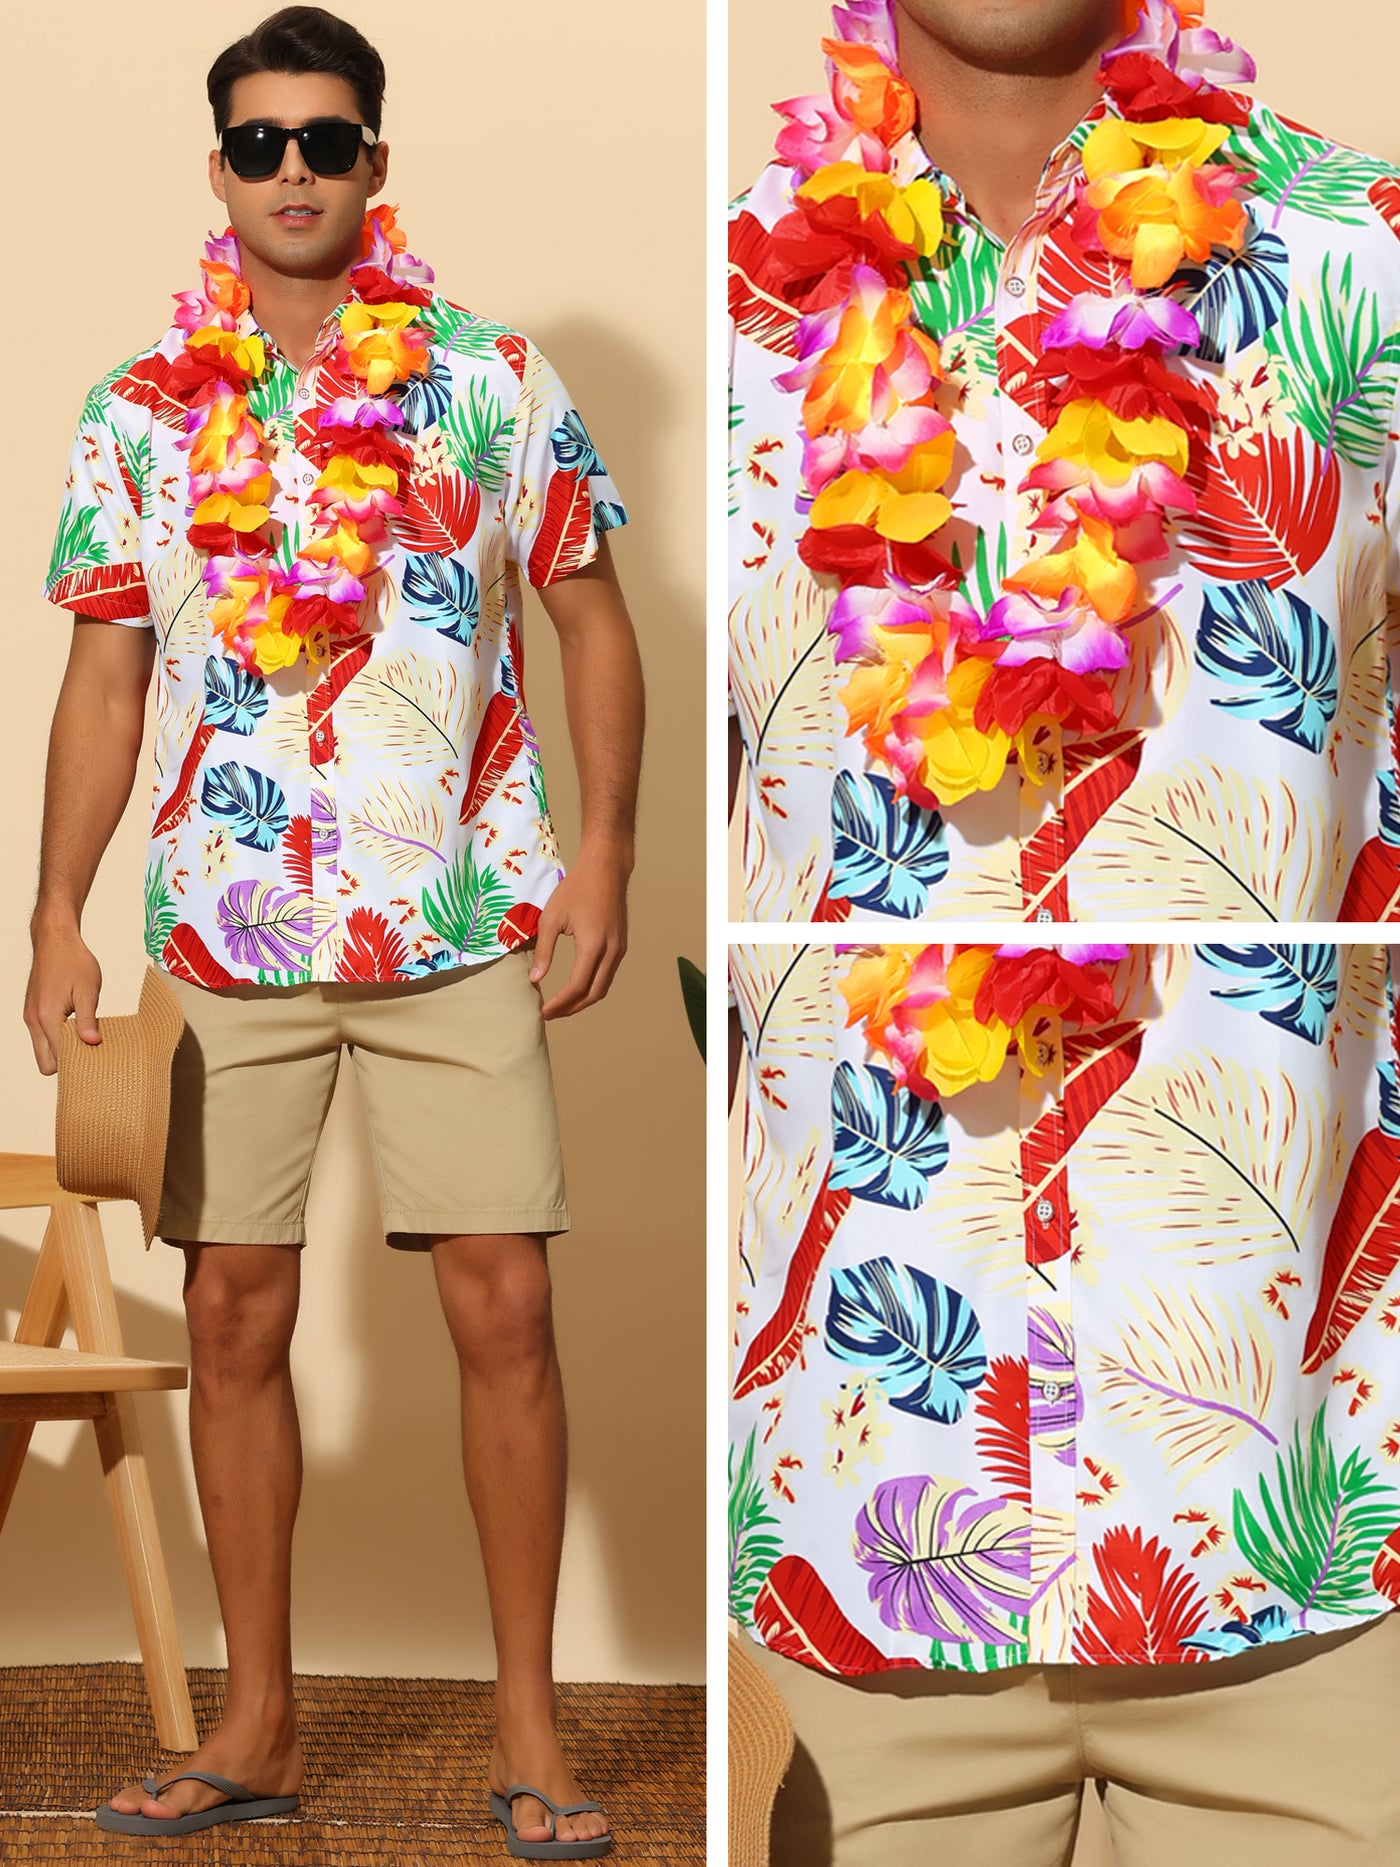 Bublédon Tropical Flowers Shirt for Men's Short Sleeves Button Down Party Floral Hawaiian Shirts